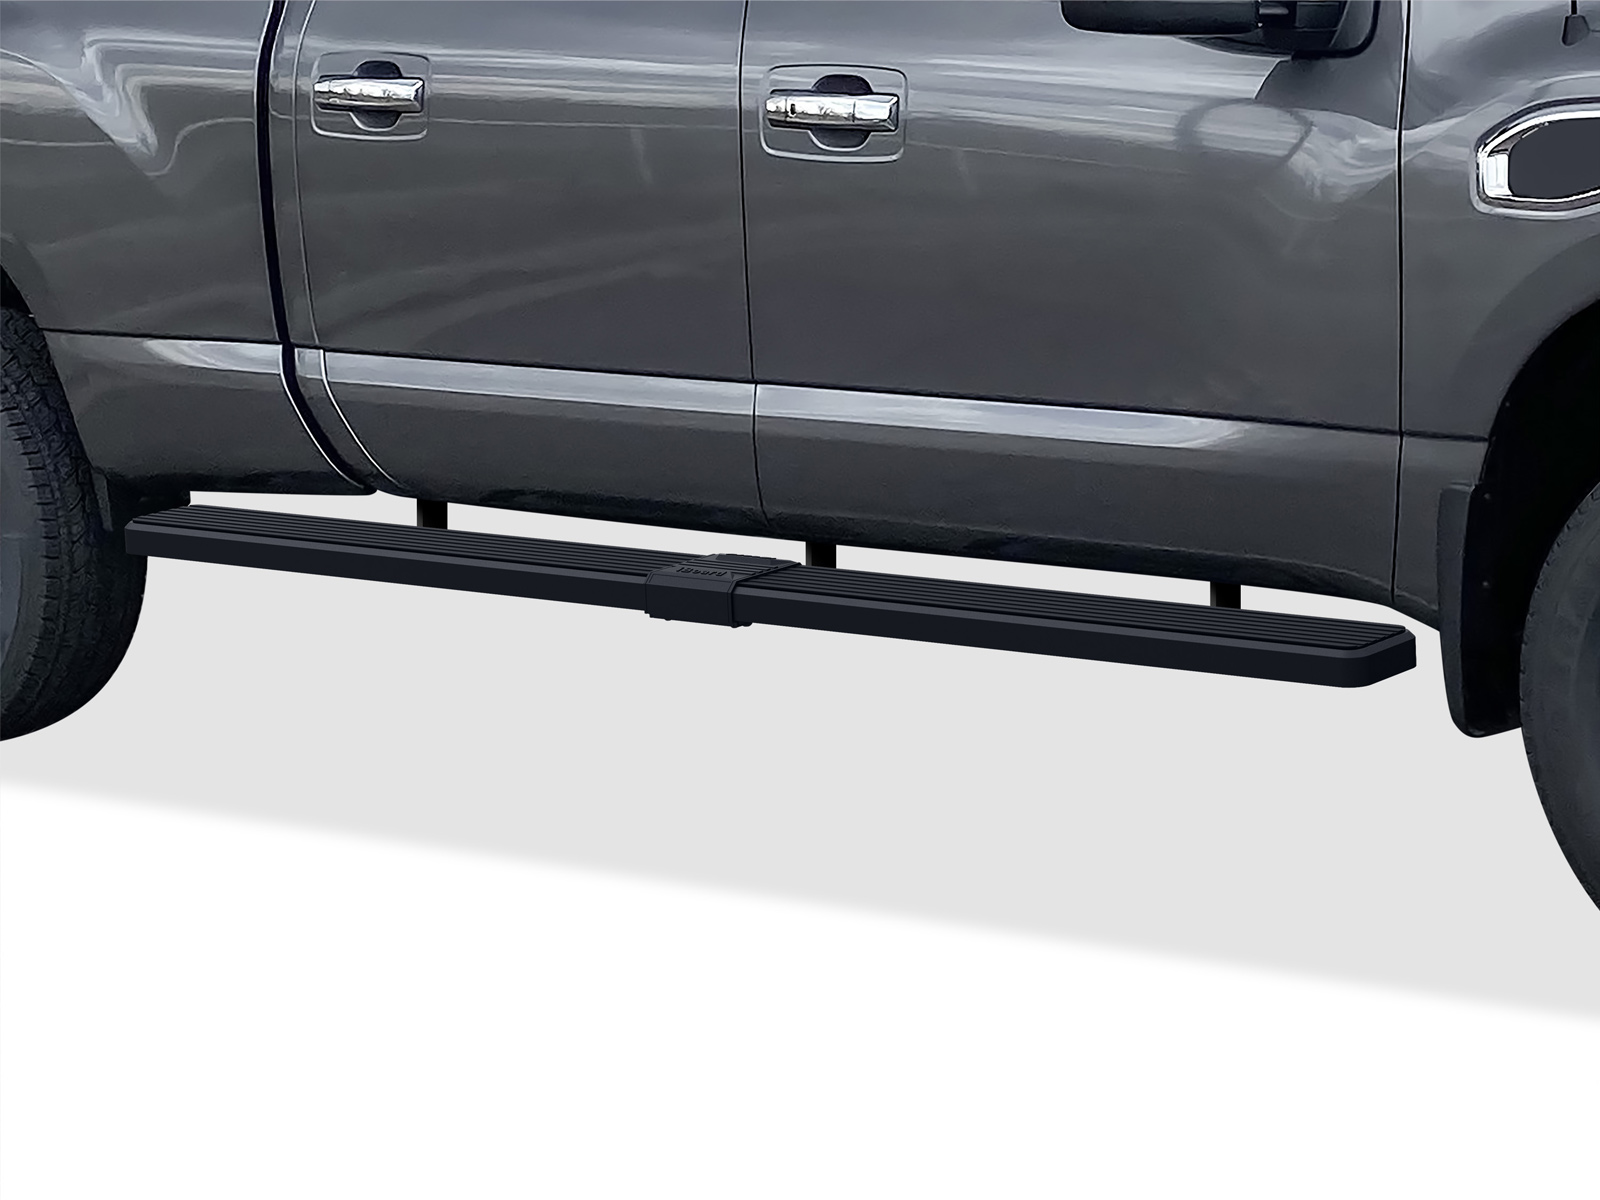 2004-2024 Nissan Titan Crew Cab (Exl. 2016 Models) 2016-2024 Nissan Titan XD Crew Cab|6.5 ft Bed Both Sides iStep W2W 6 Inch Stainless Steel